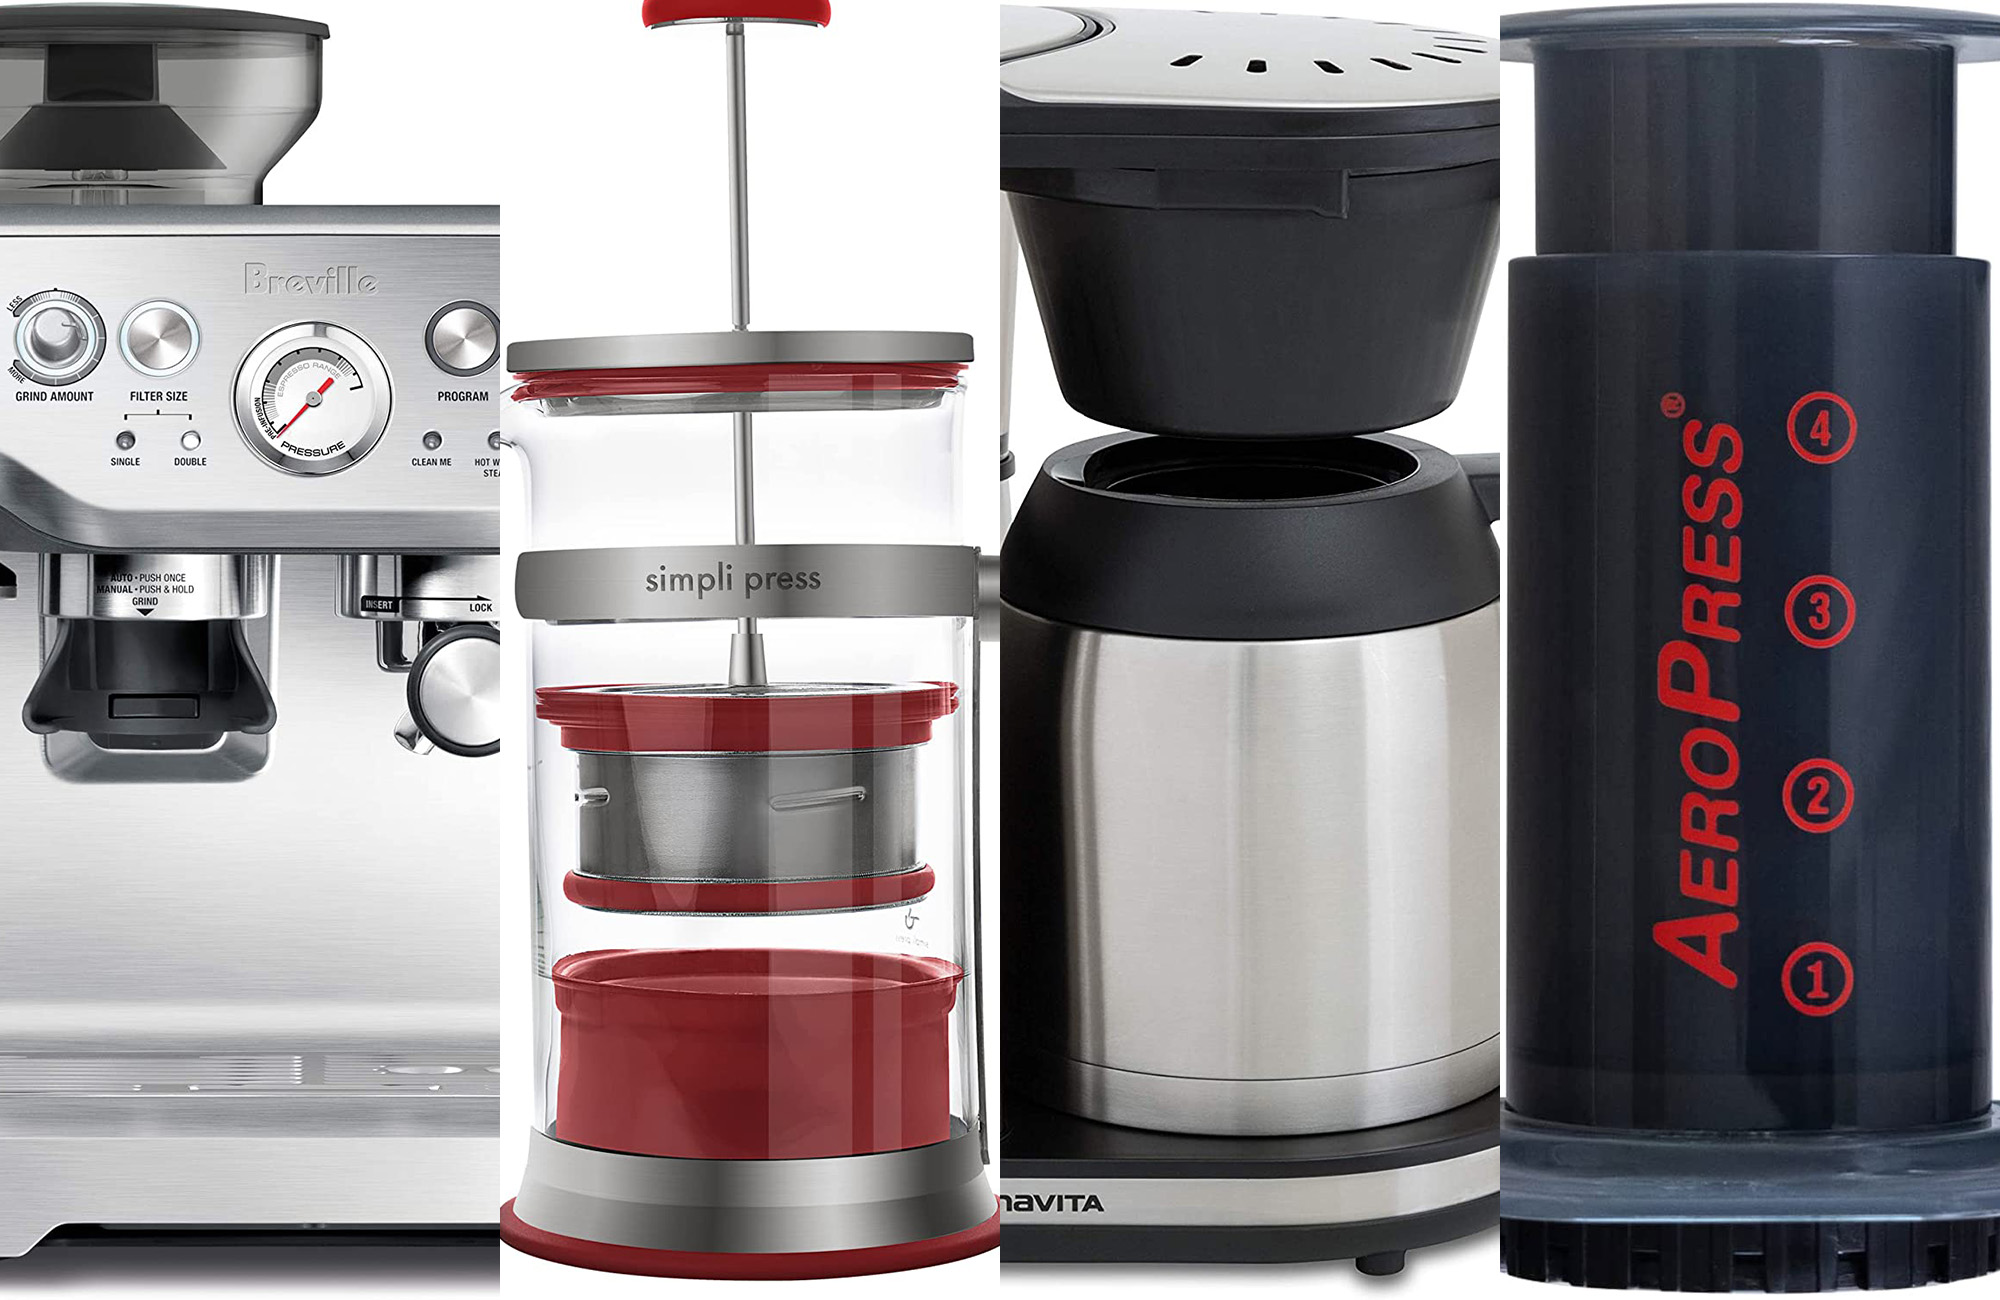 Last-minute coffee gifts to turn any kitchen into a café